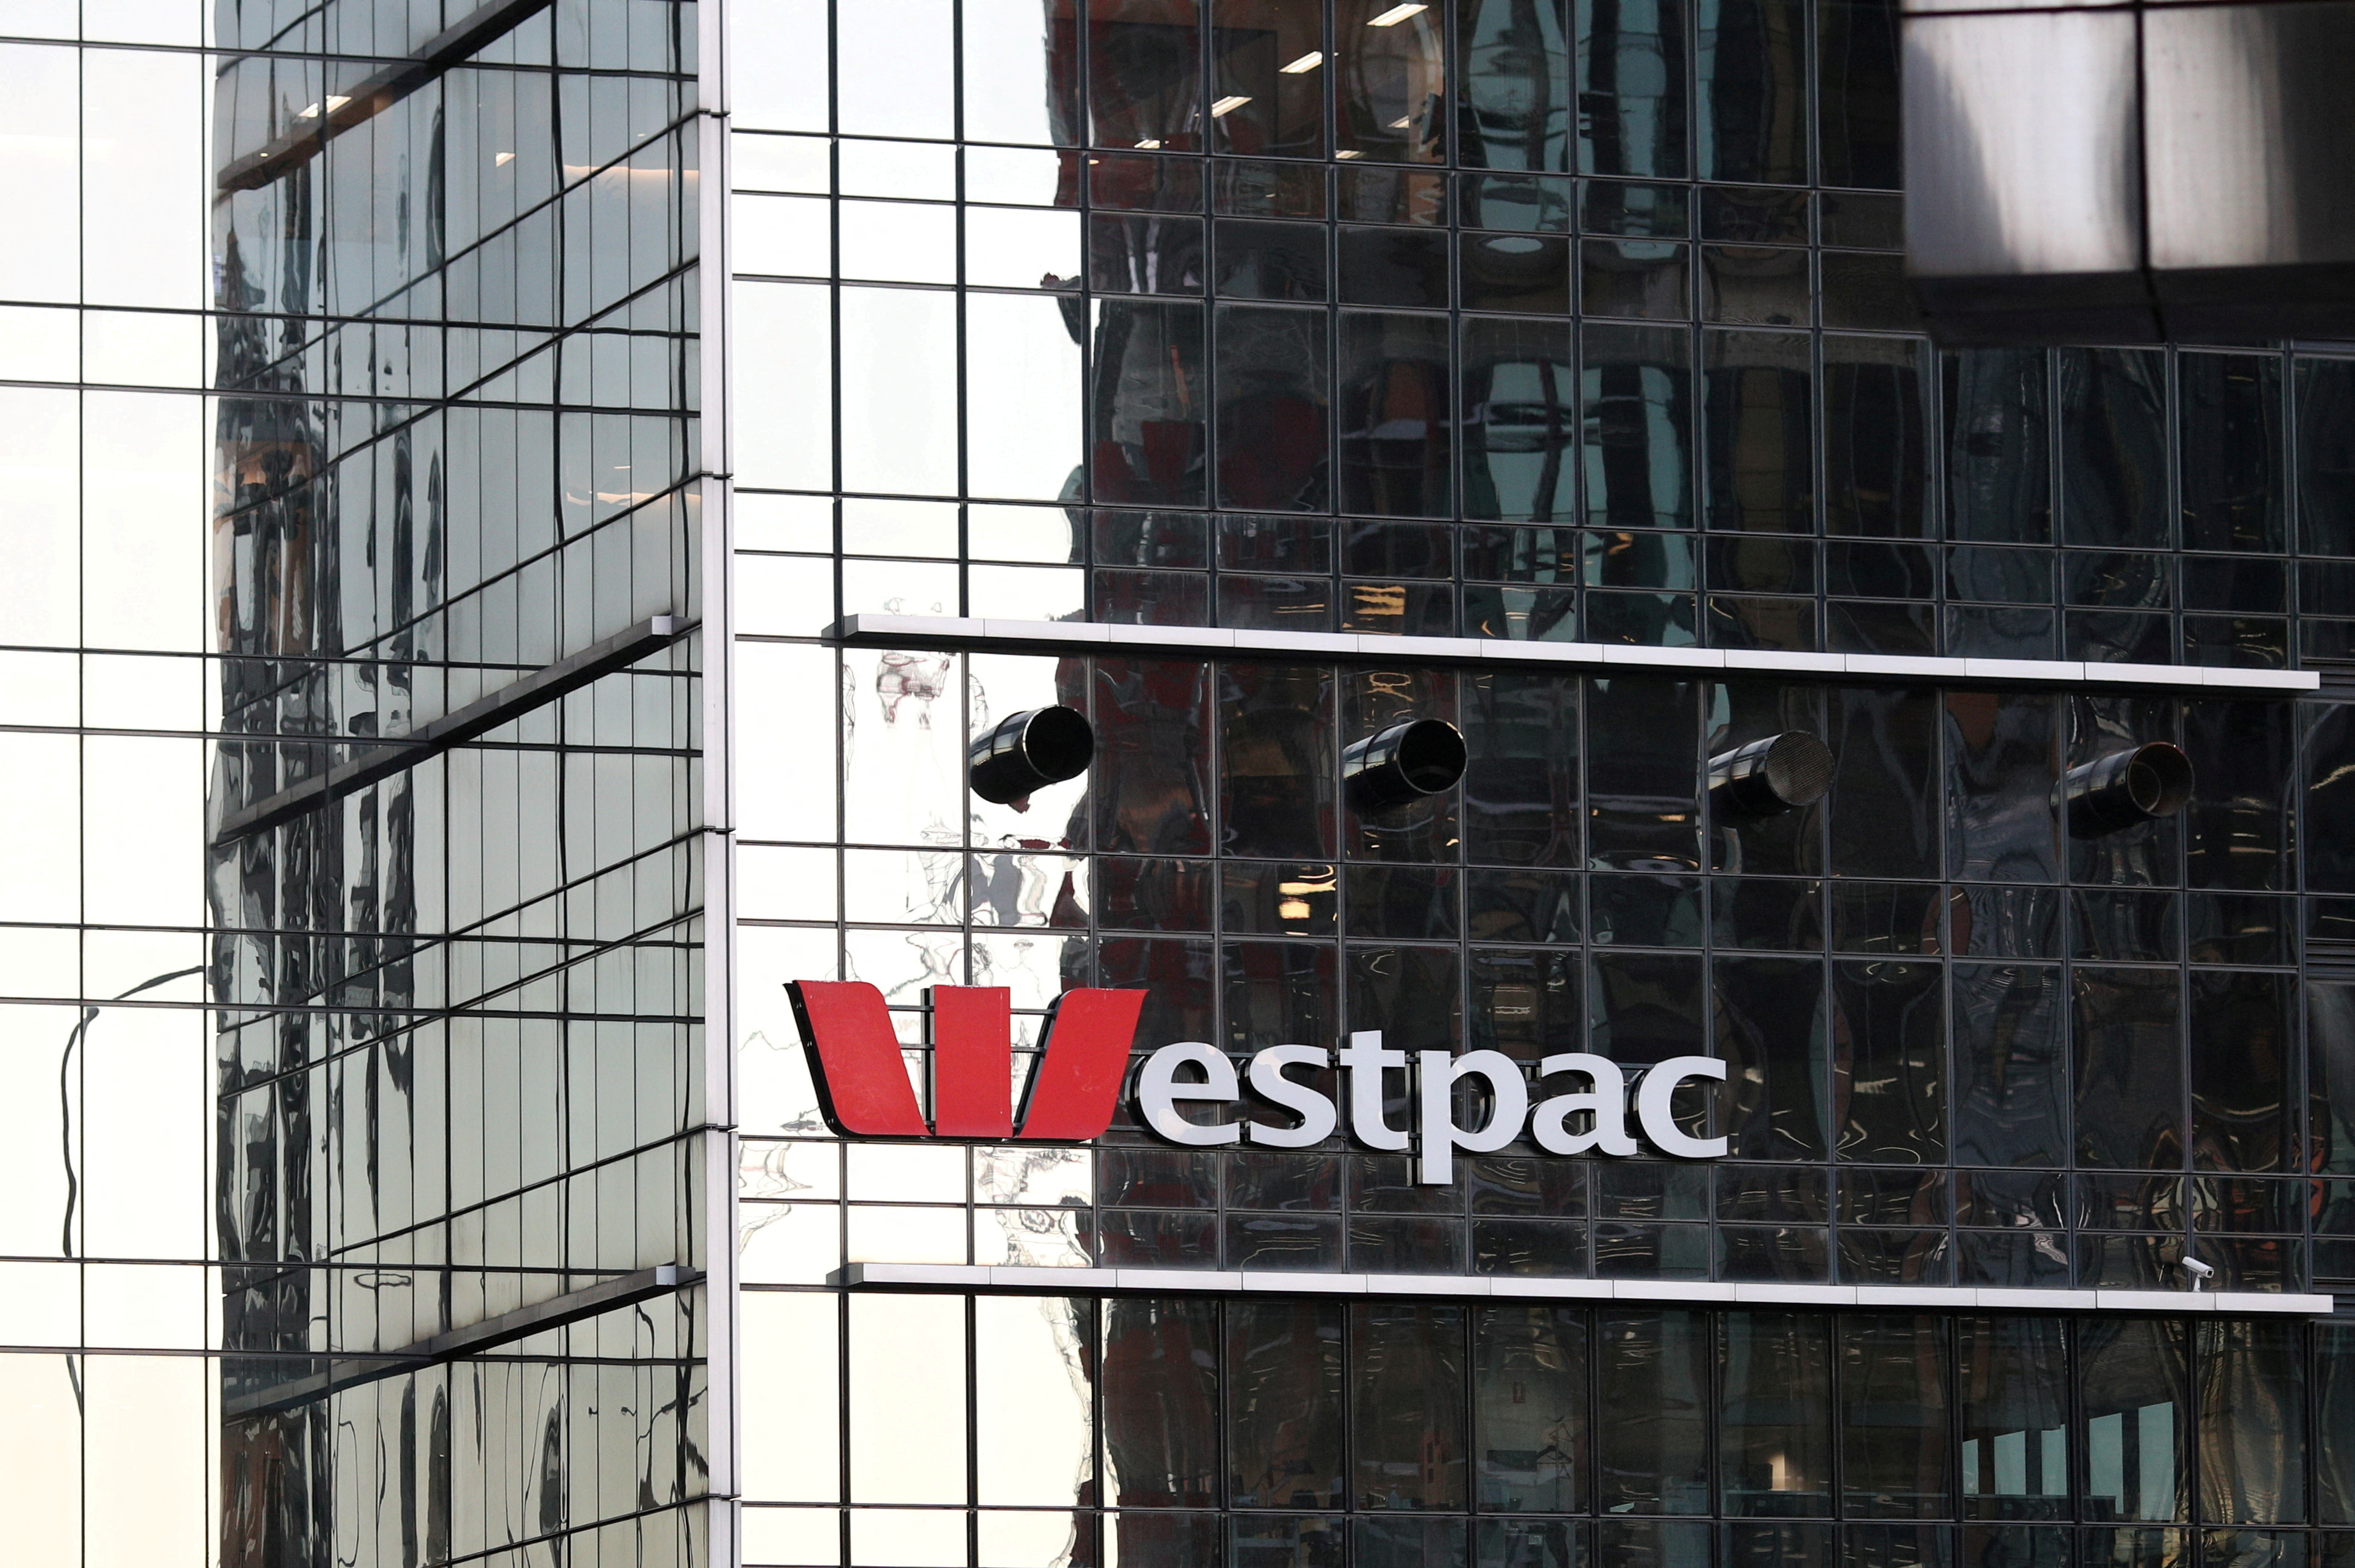 An office building with Westpac logo is seen in Sydney